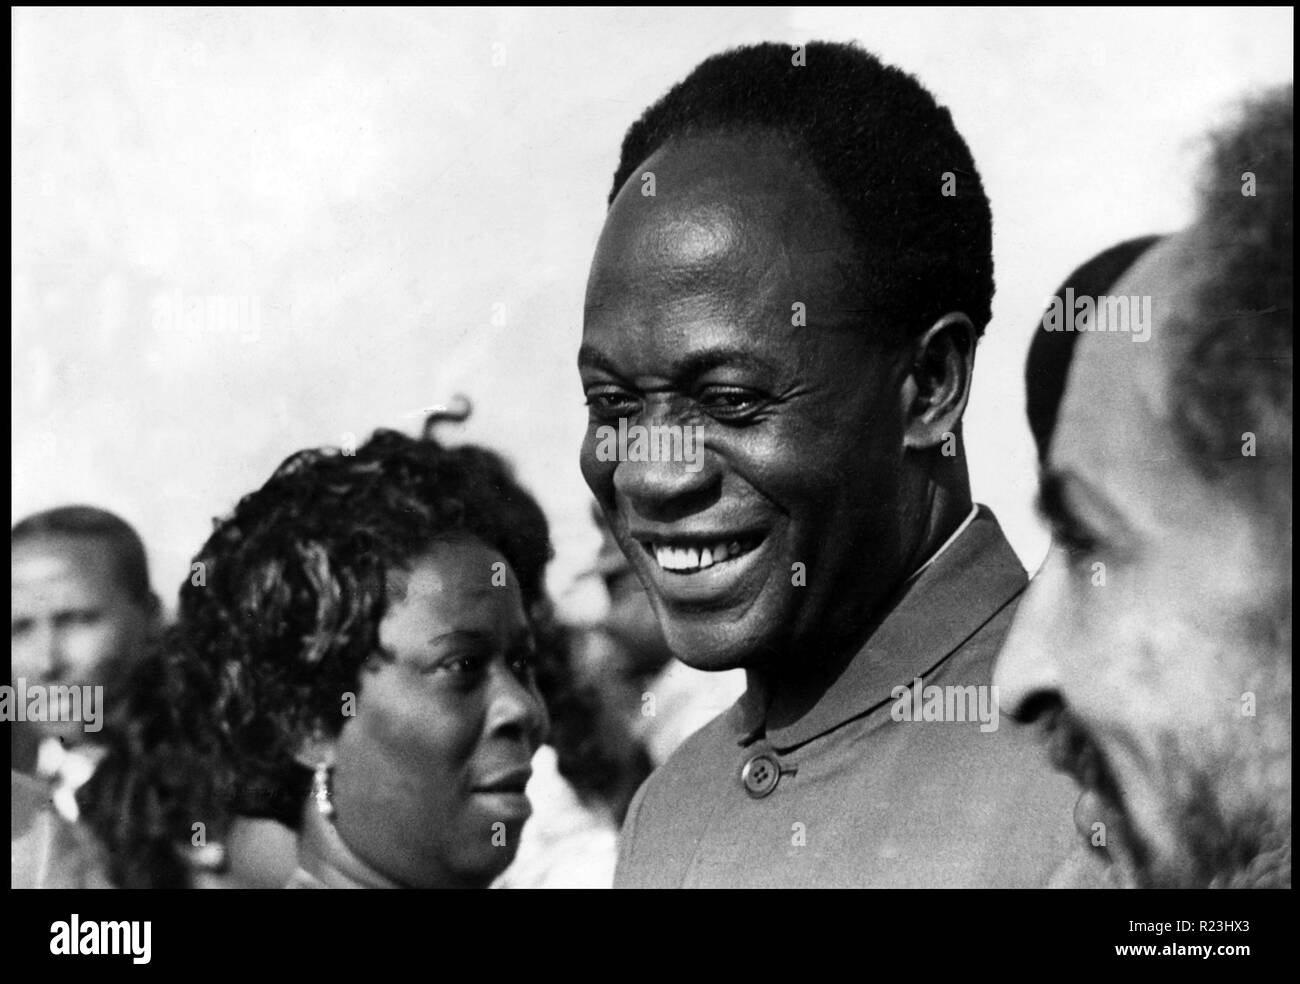 Kwame Nkrumah, the leader of Ghana and its predecessor state, the Gold Coast, from 1951 to 1966 Stock Photo - Alamy